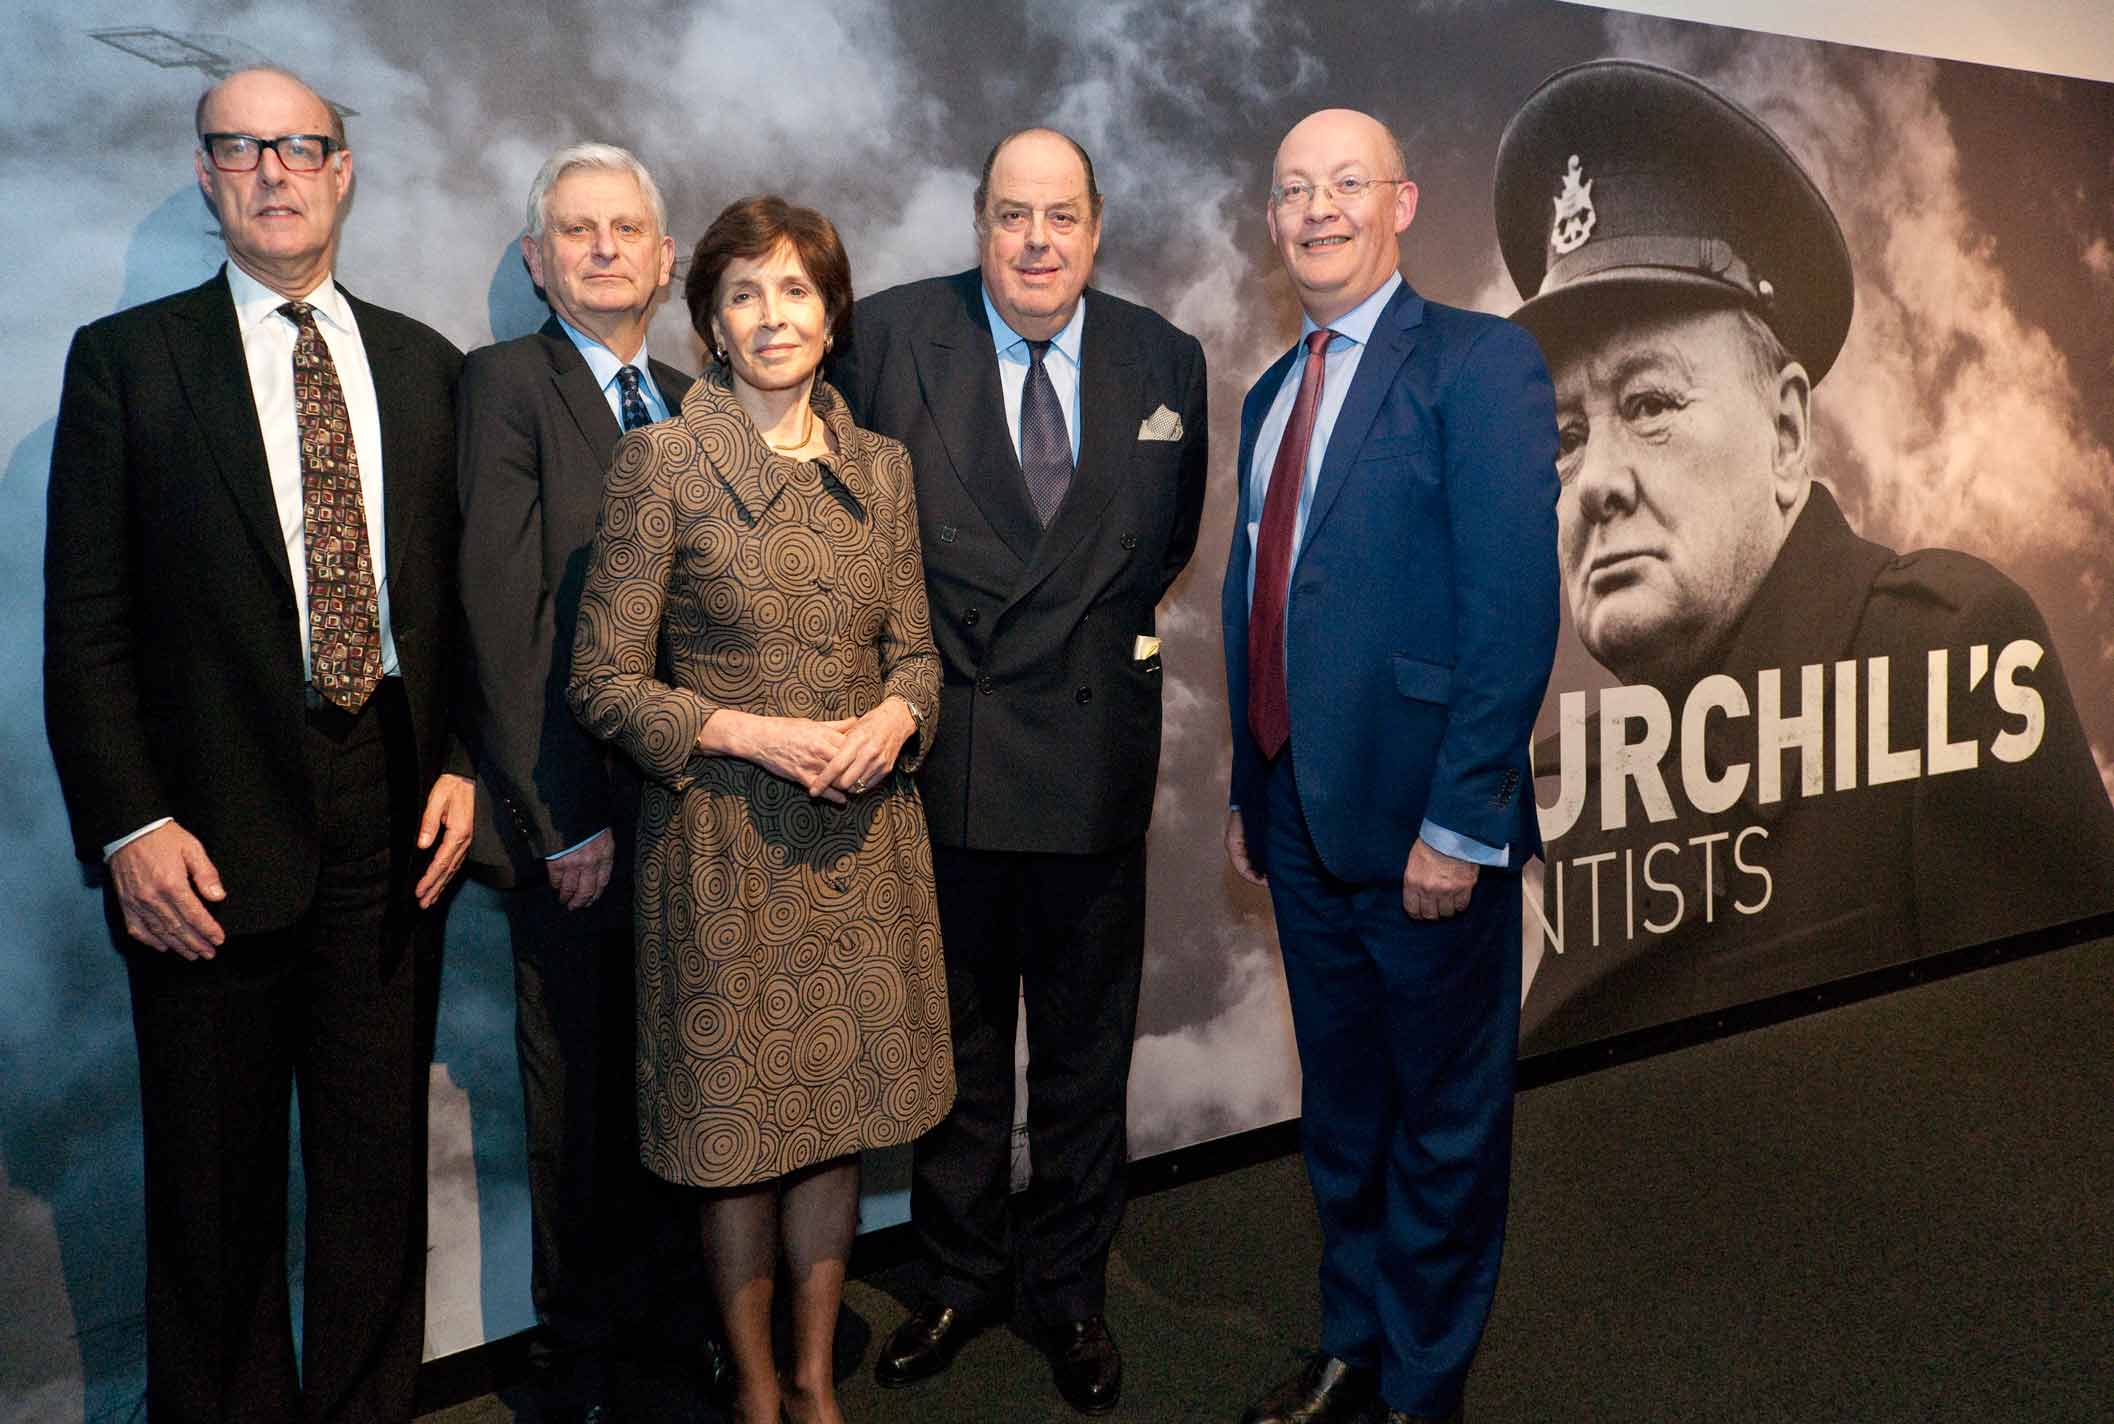 From left to right: Professor Sir David Cannadine, Andrew Nahum, Lead Curator, Dame Mary Archer, Sir Nicholas Soames and Ian Blatchford at the official opening of Churchill's Scientists 